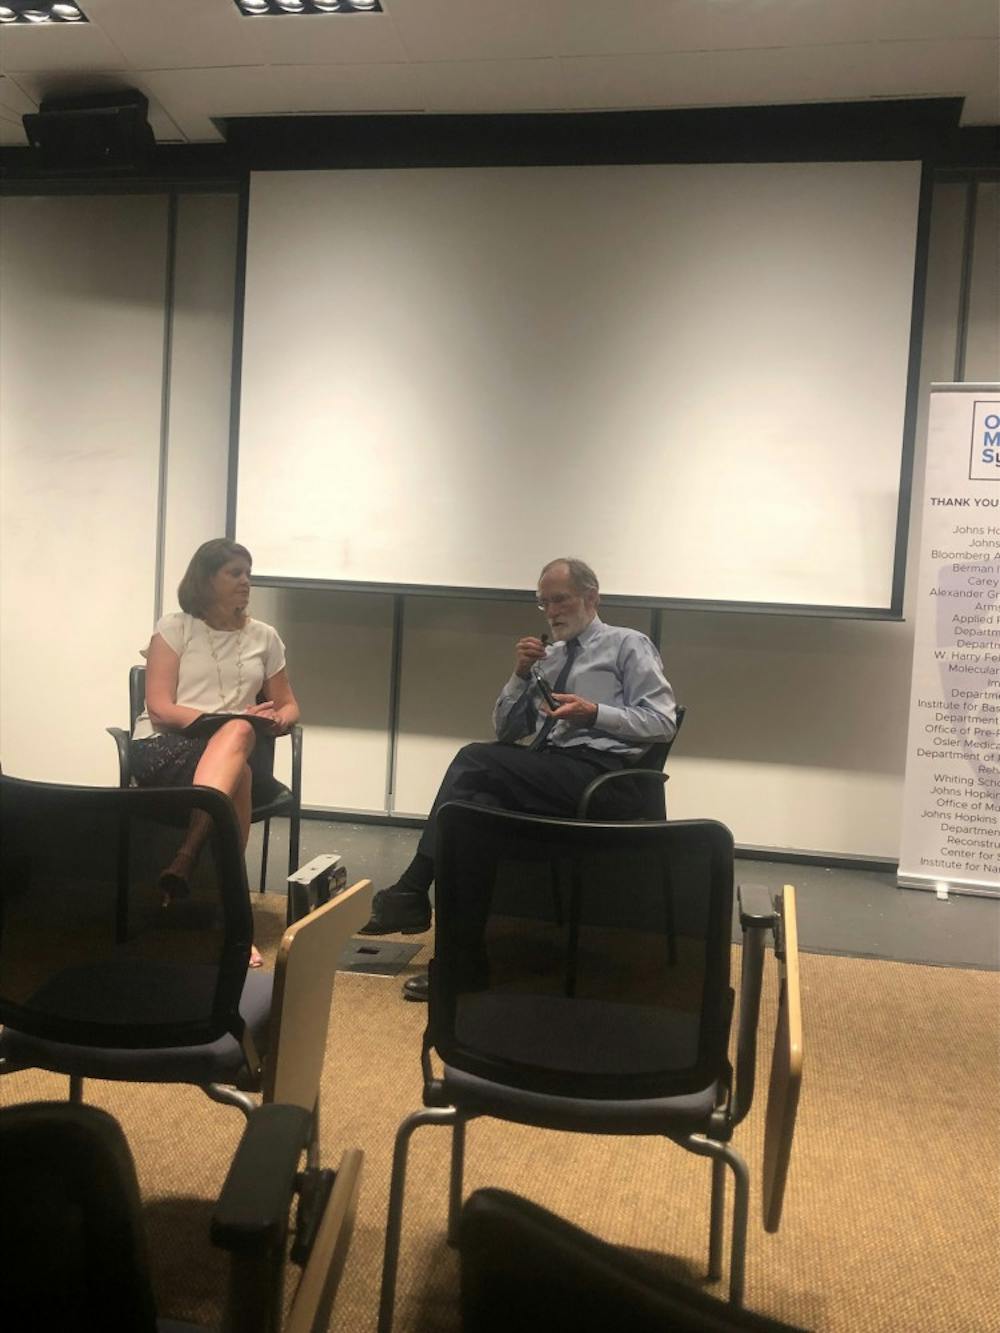 Courtesy of Laura Wadsten
Sheri Lewis and Peter Agre discuss their experiences in medical diplomacy for Osler Medical Symposium.